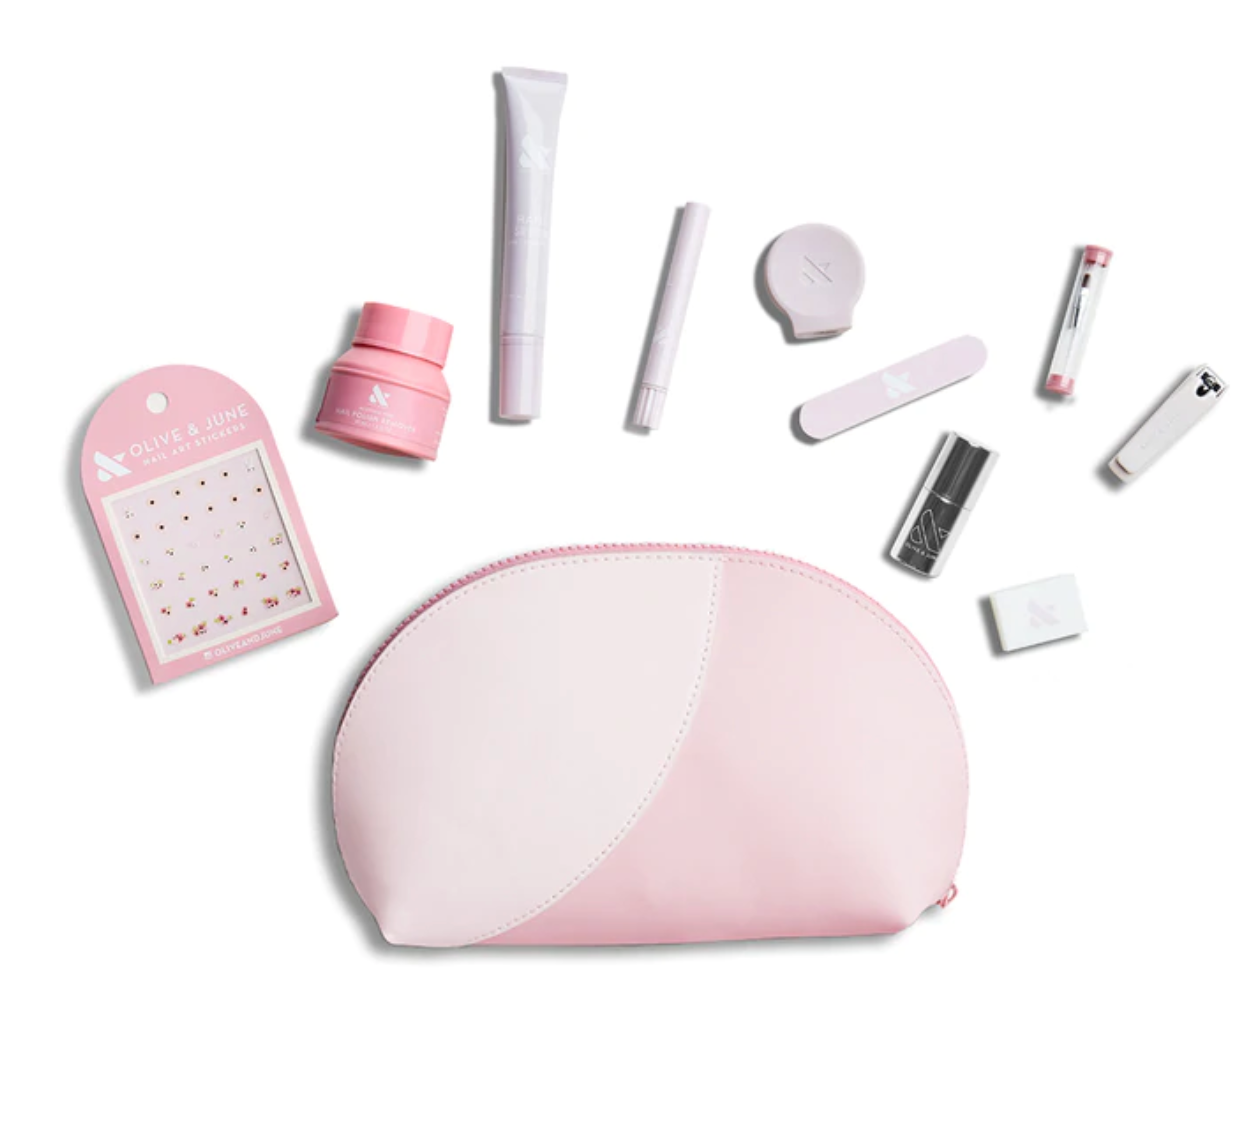 the pink bag with all the manicure essentials included above it